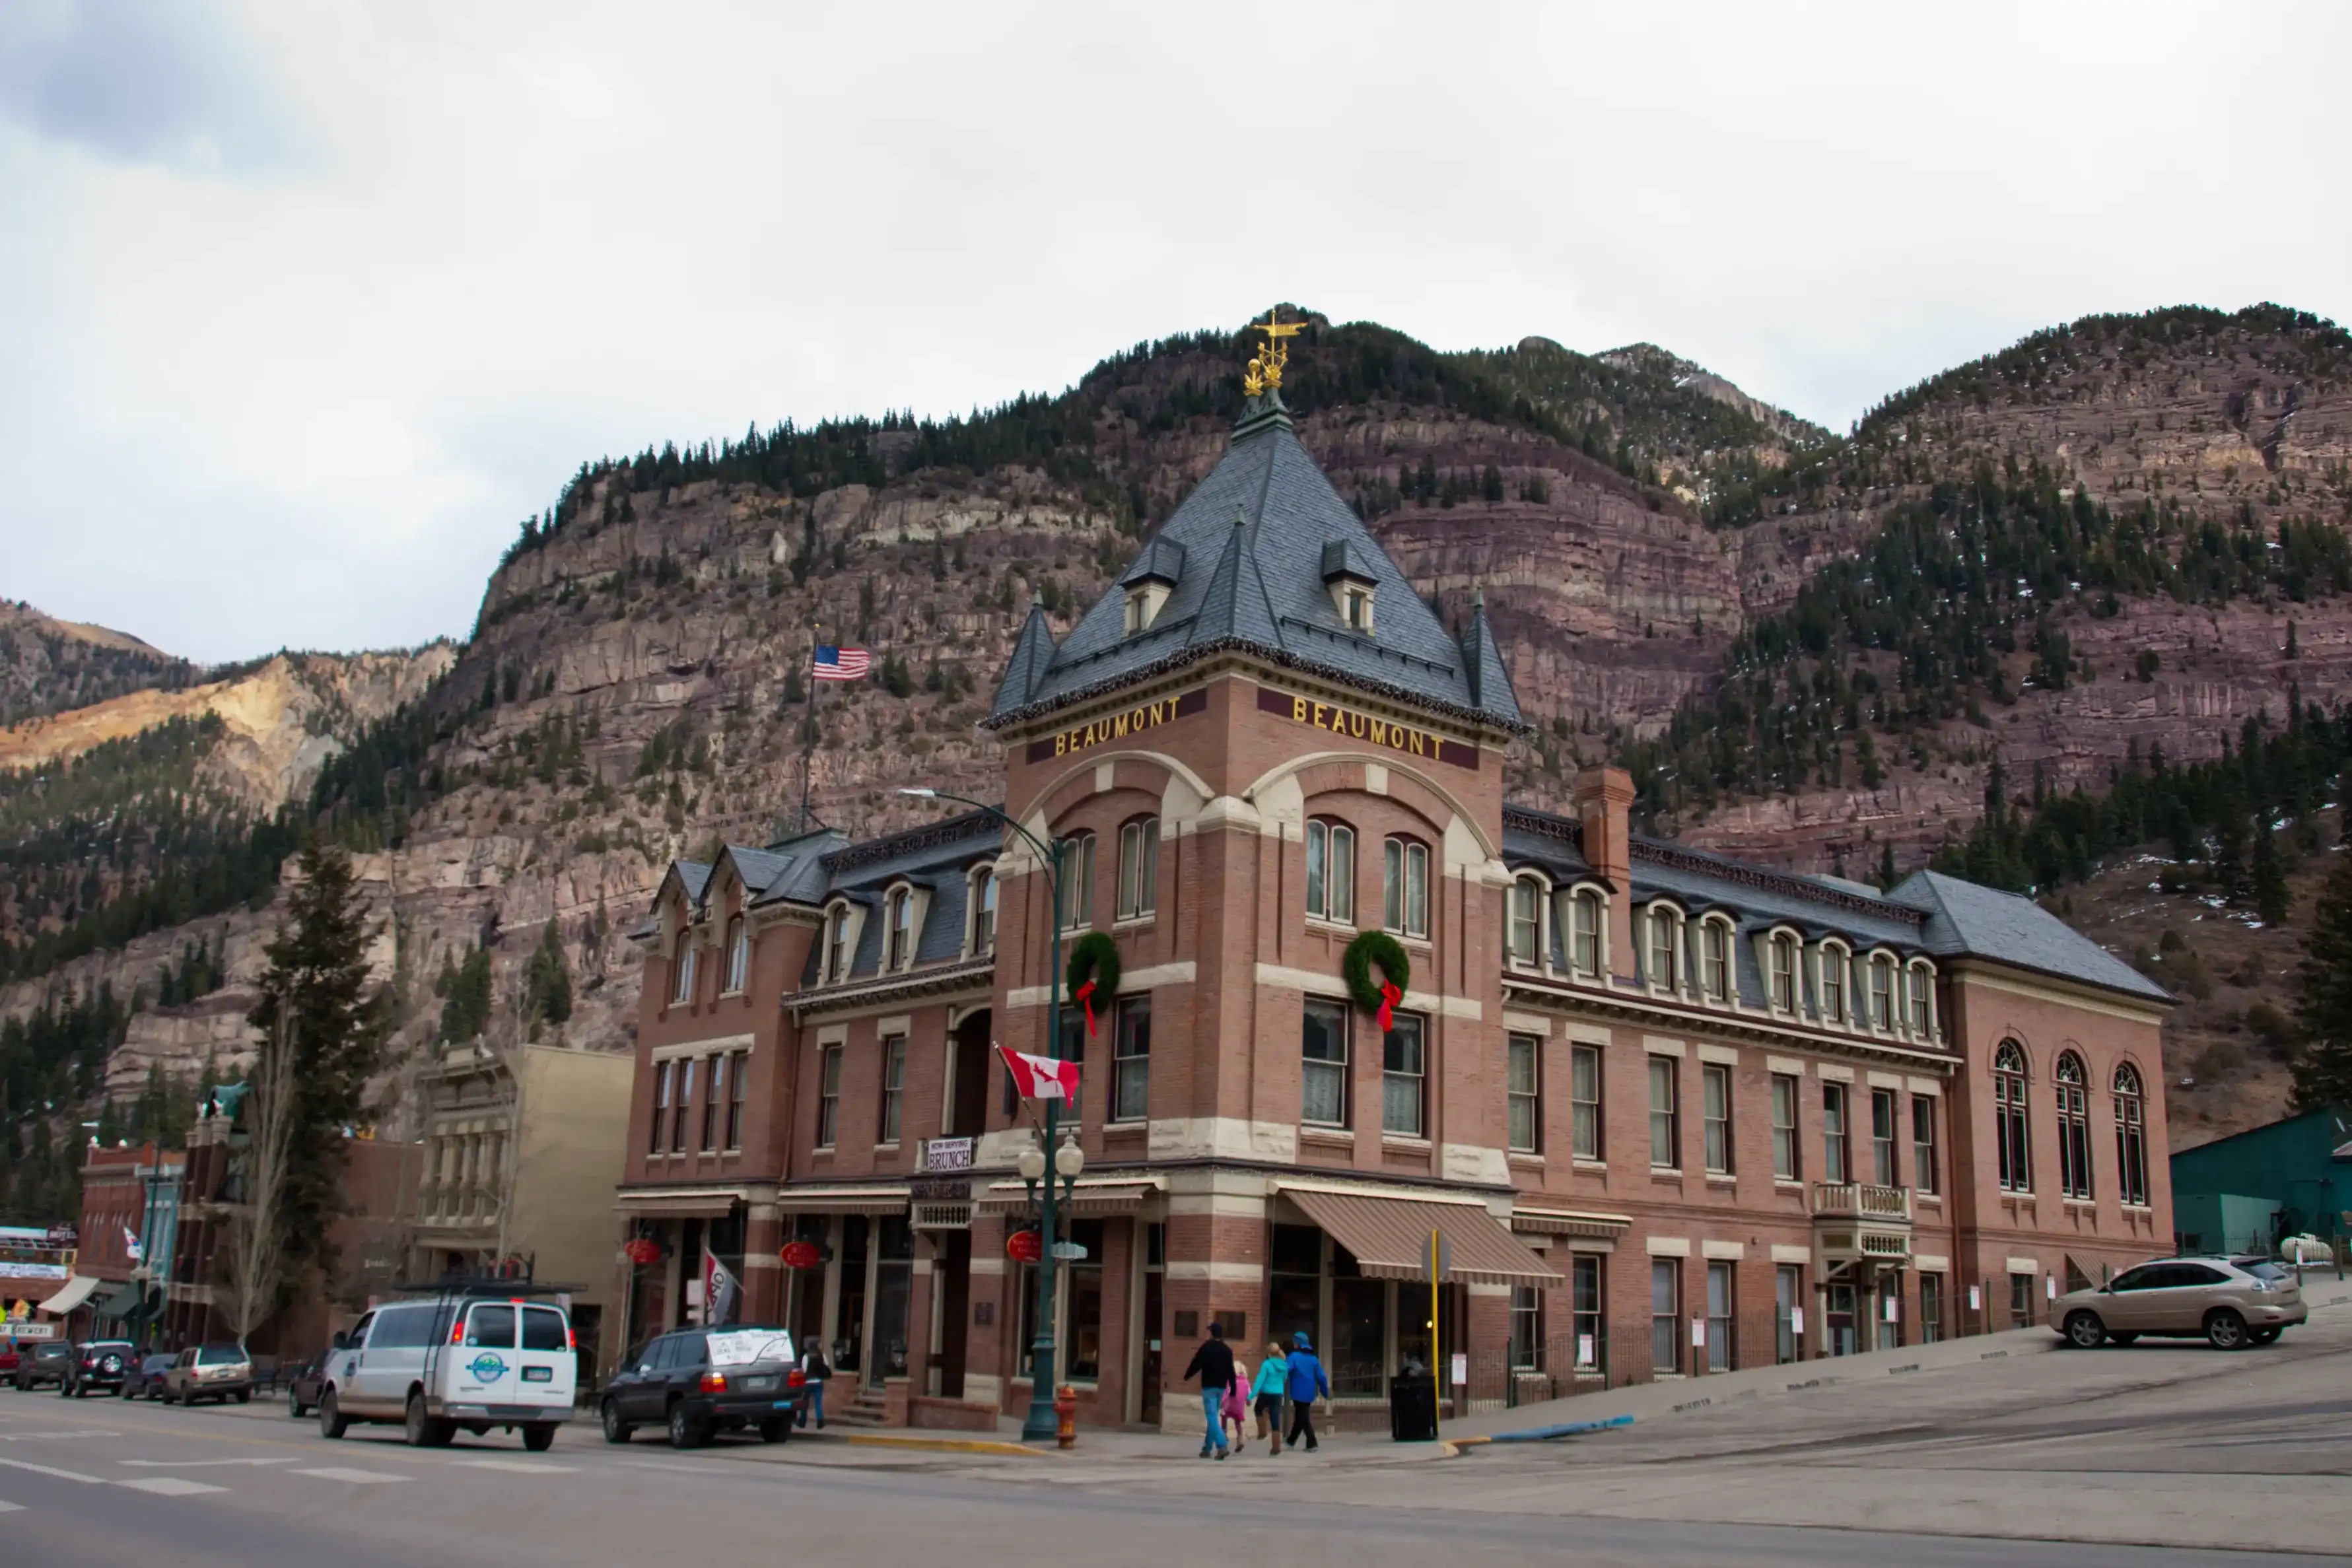 Best Ouray hotels. Cheap hotels in Ouray, Colorado, United States